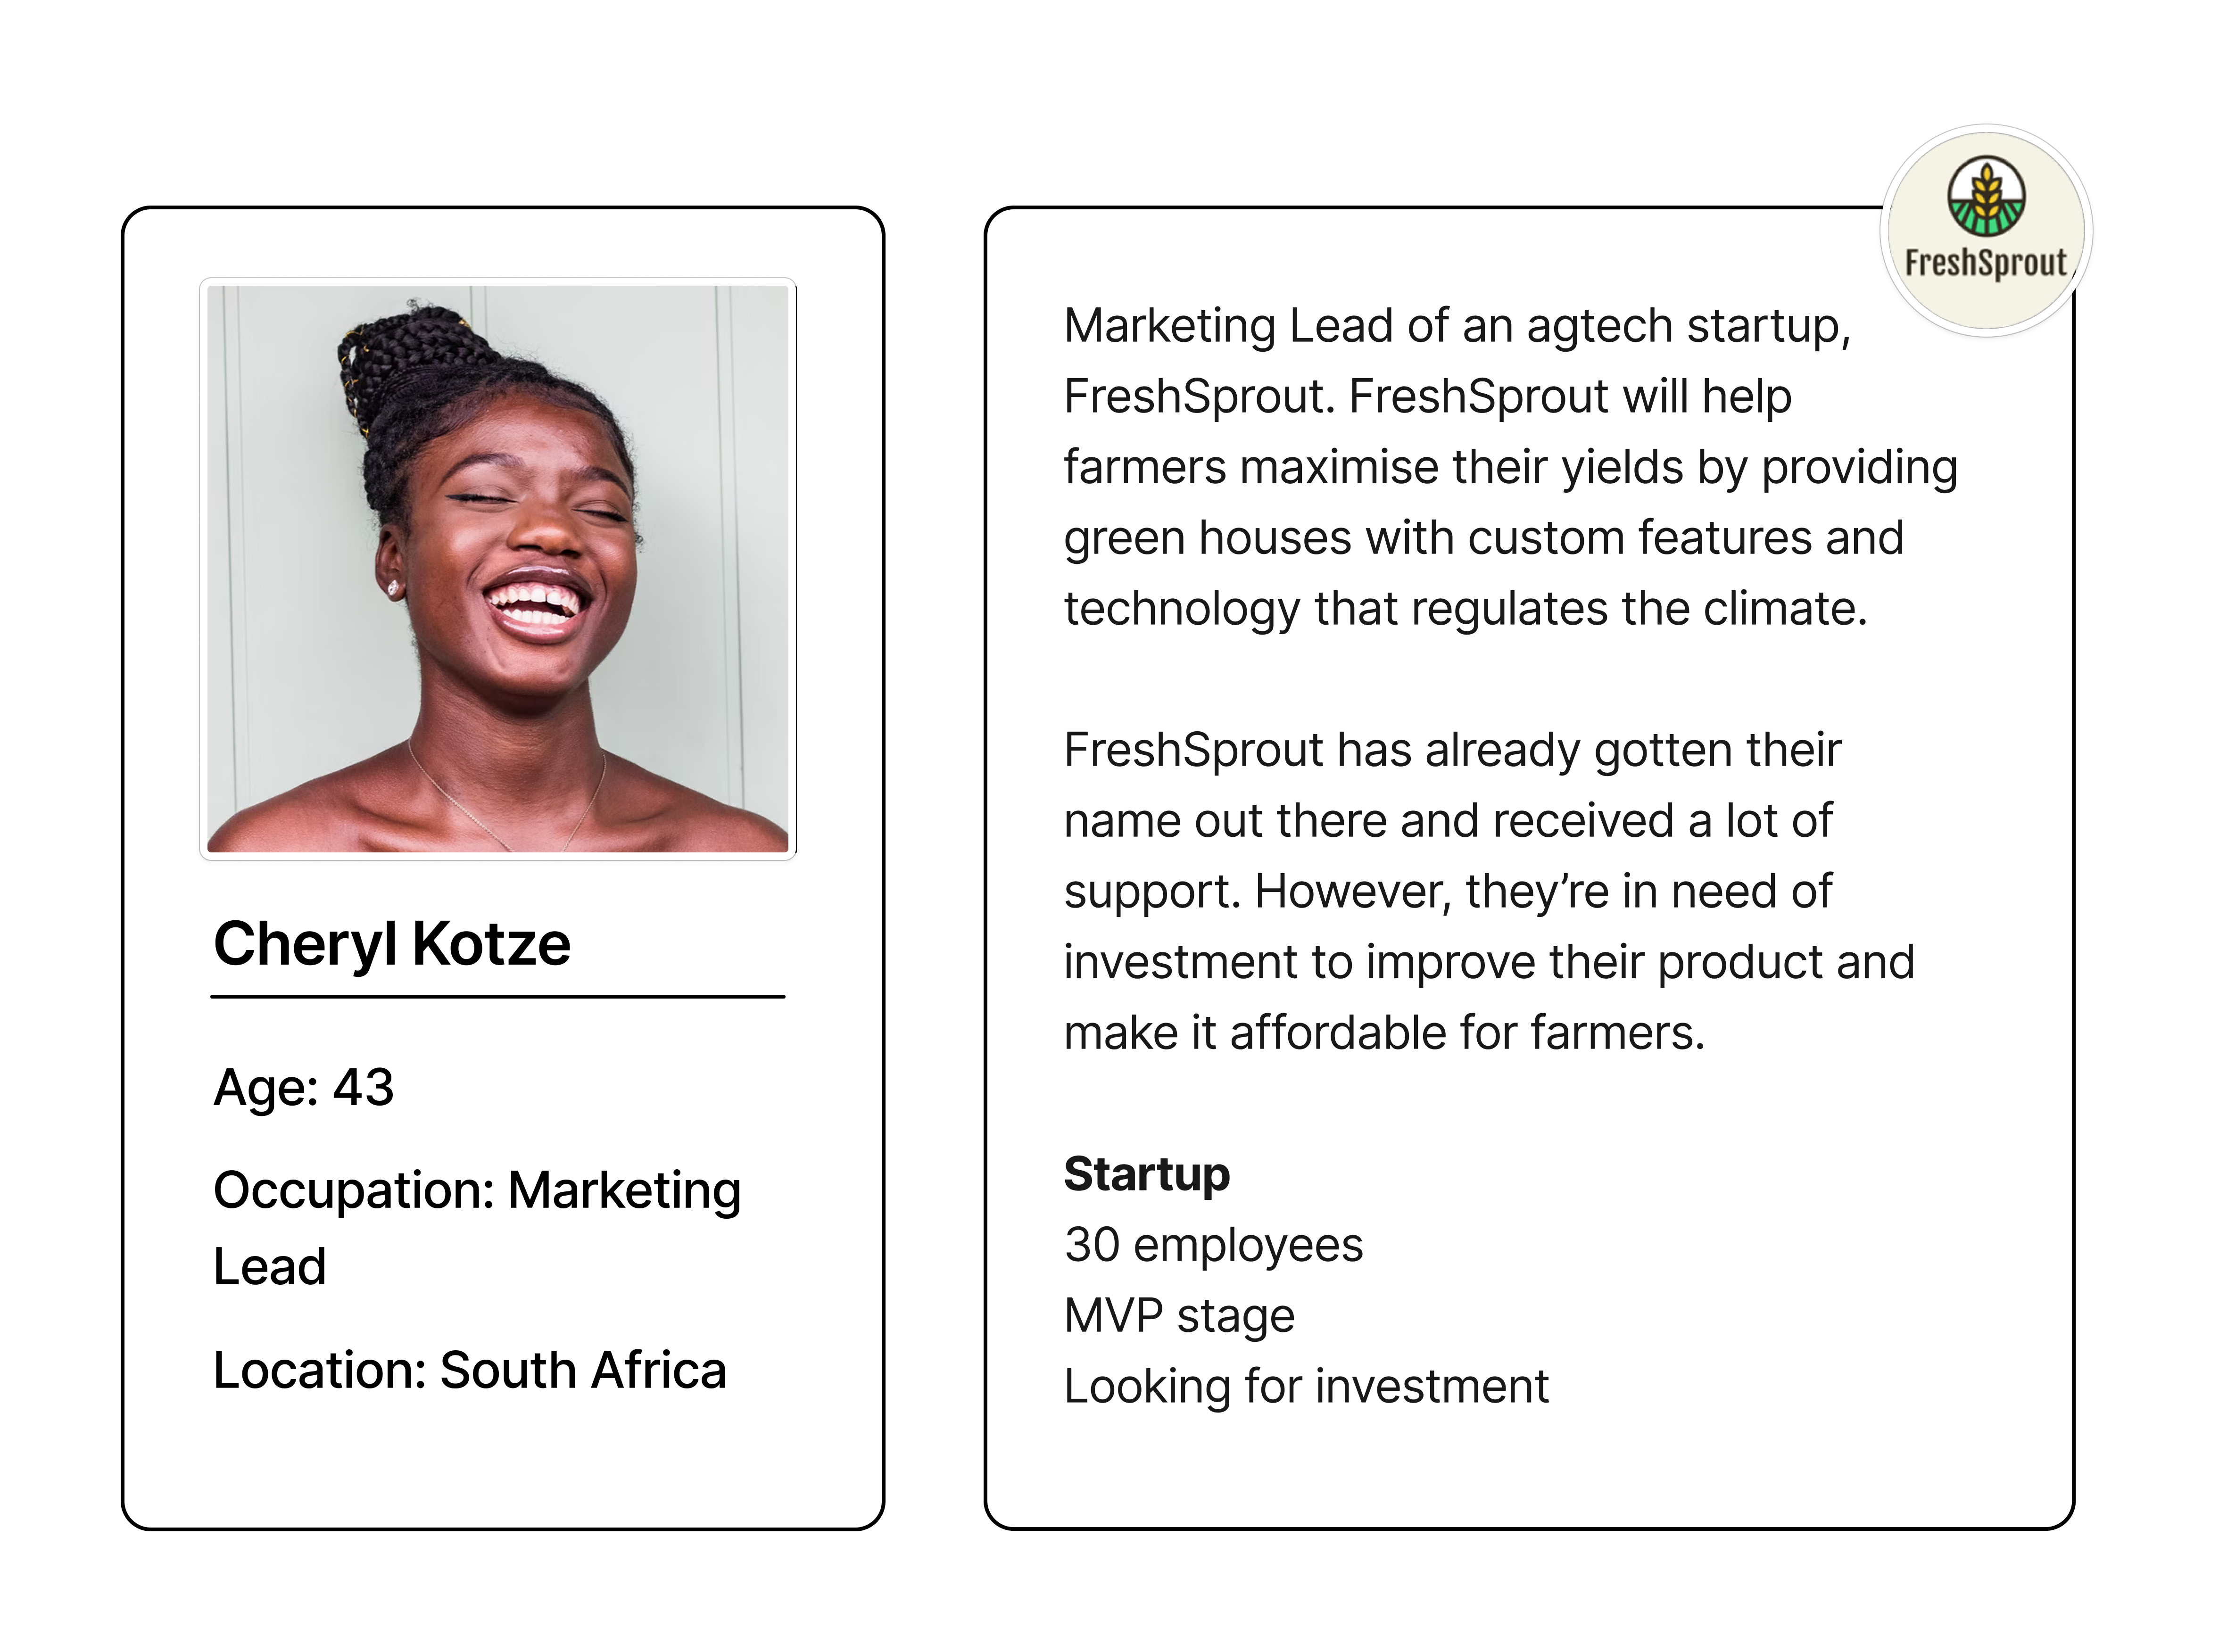 South African 43 year old Marketing Lead of an agtech startup called FreshSprout.